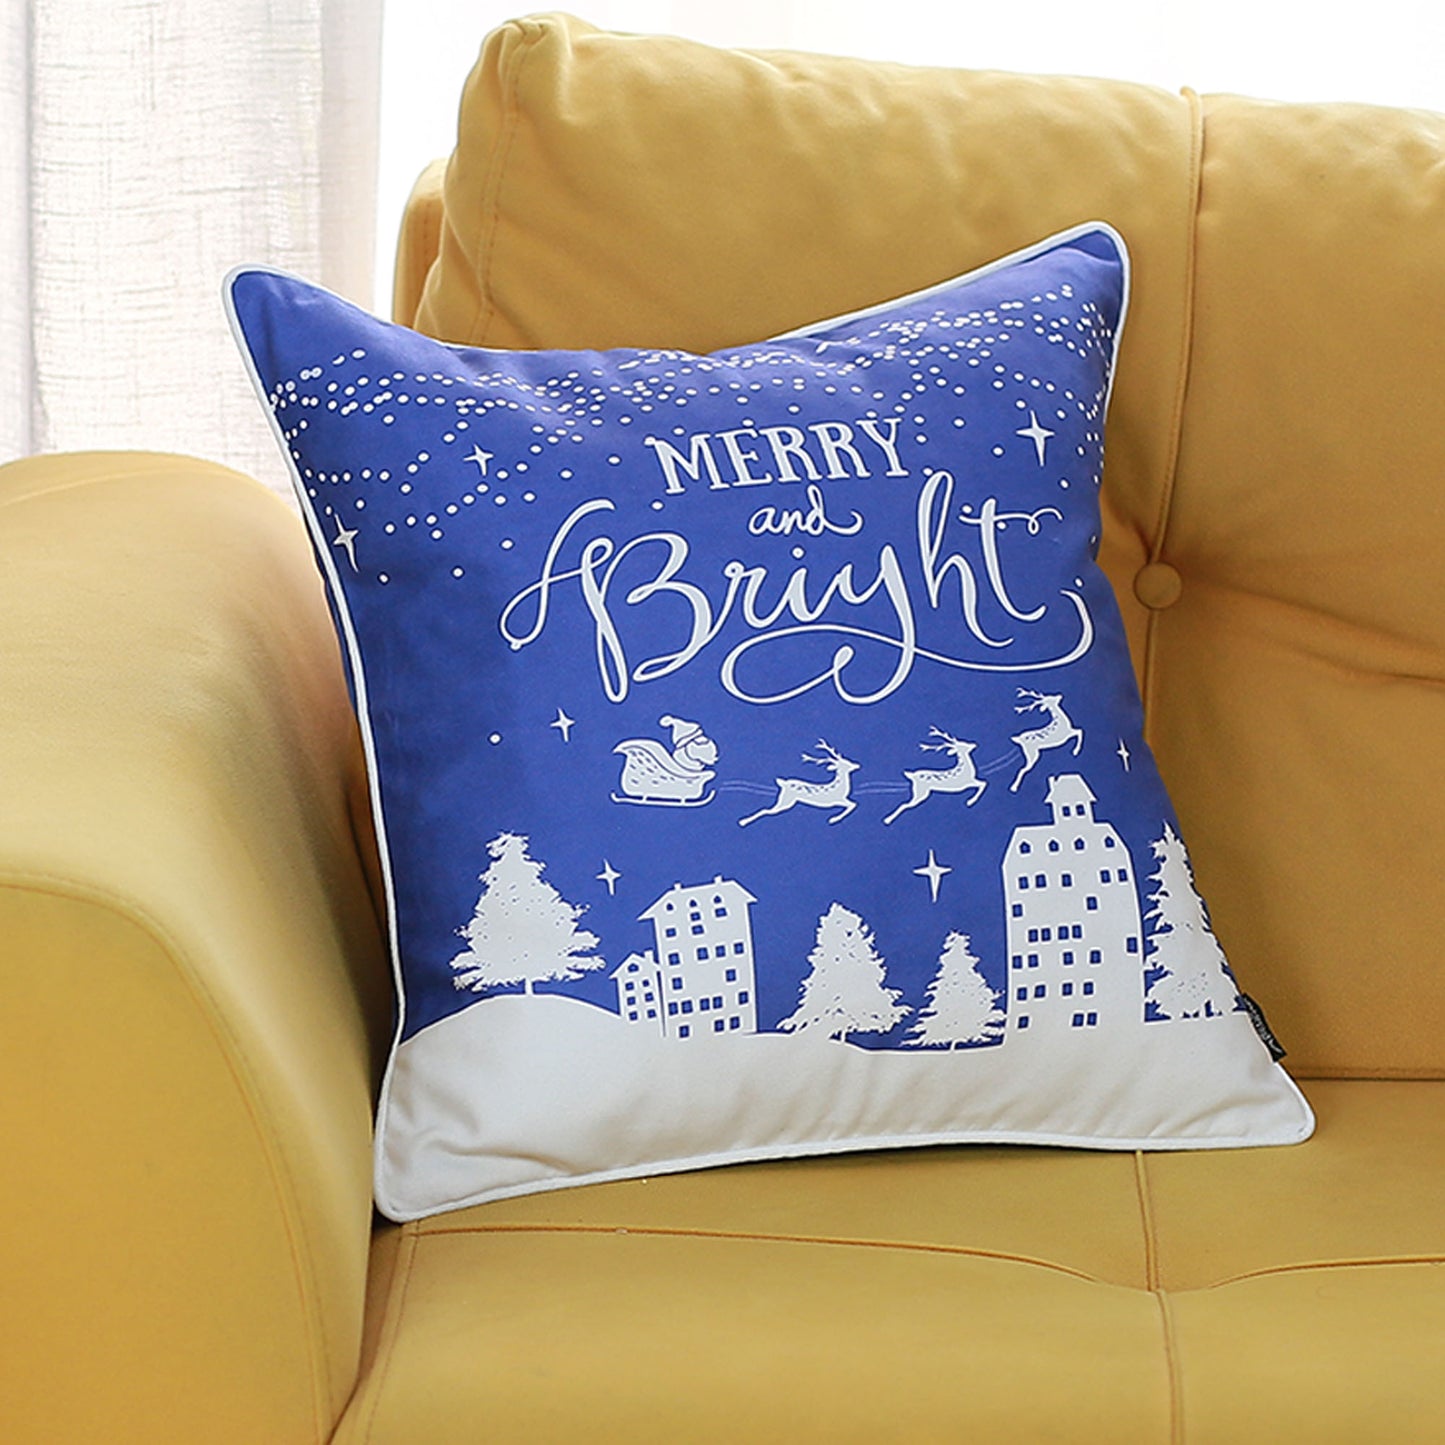 Decorative Christmas Night Single Throw Pillow Cover 18" x 18" Square for Couch, Bedding - Apolena